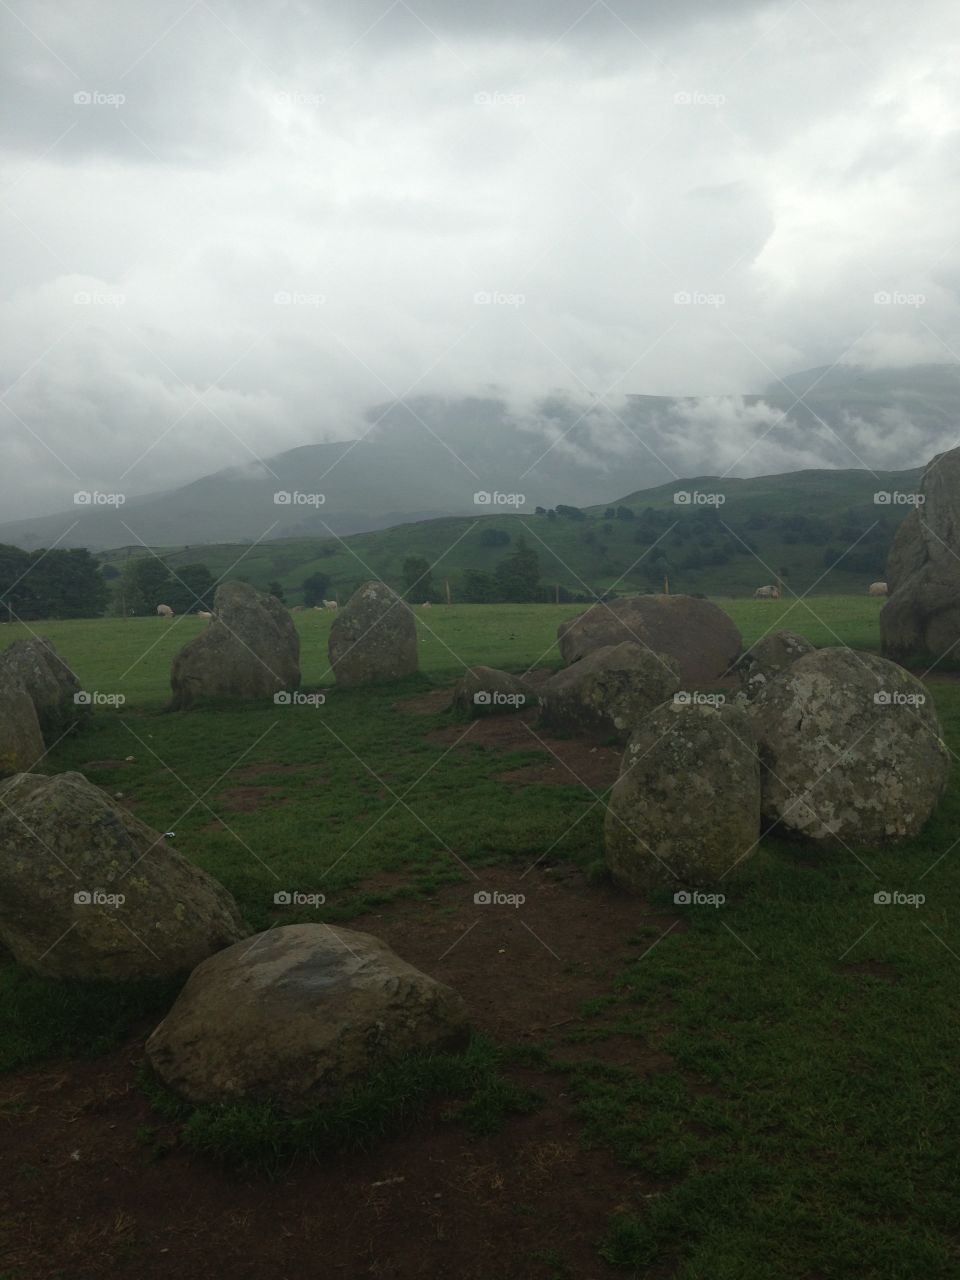 Castlerigg stone circle in the Lake District, England 